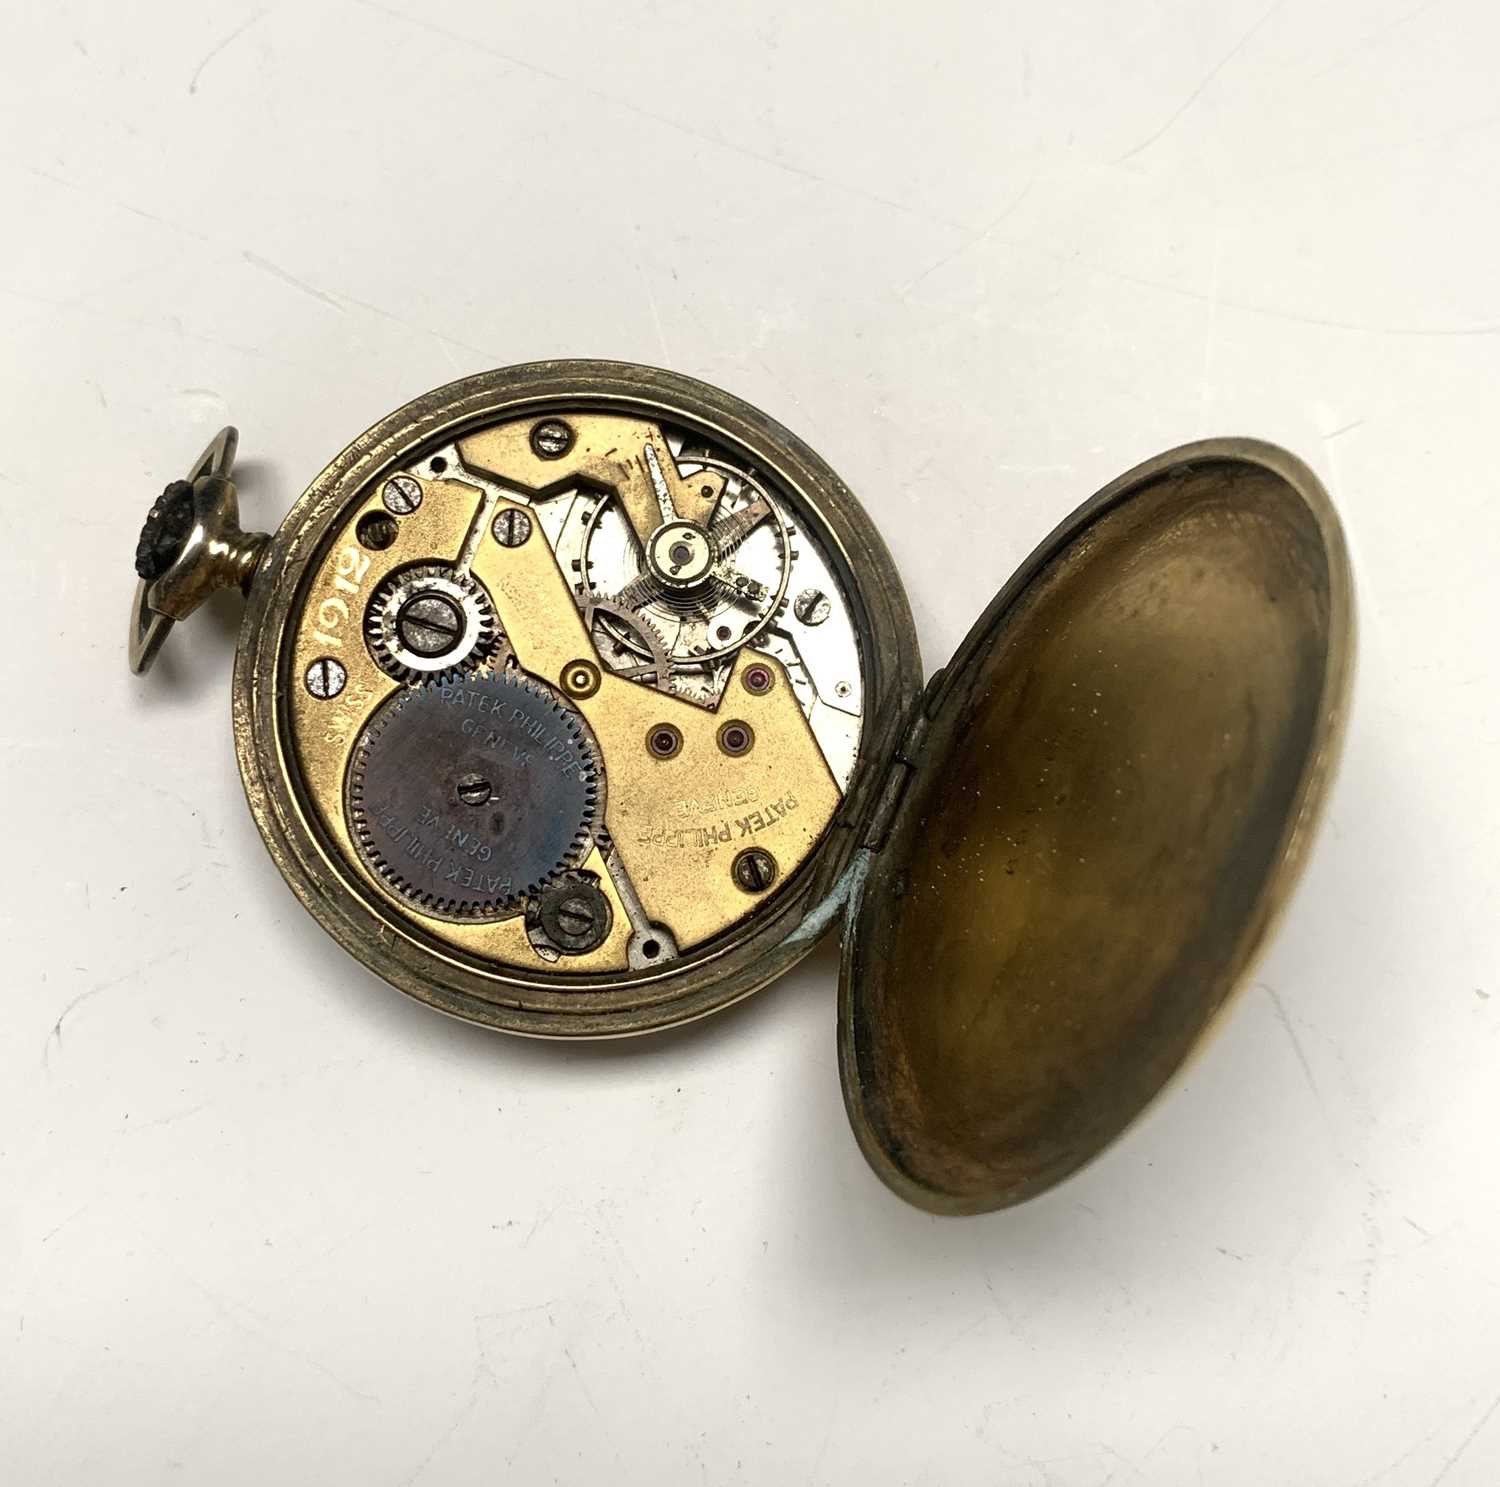 A keyless pocket watch inscribed 'Patek Philippe Geneve'.Condition report: Doesn't work - Image 2 of 2